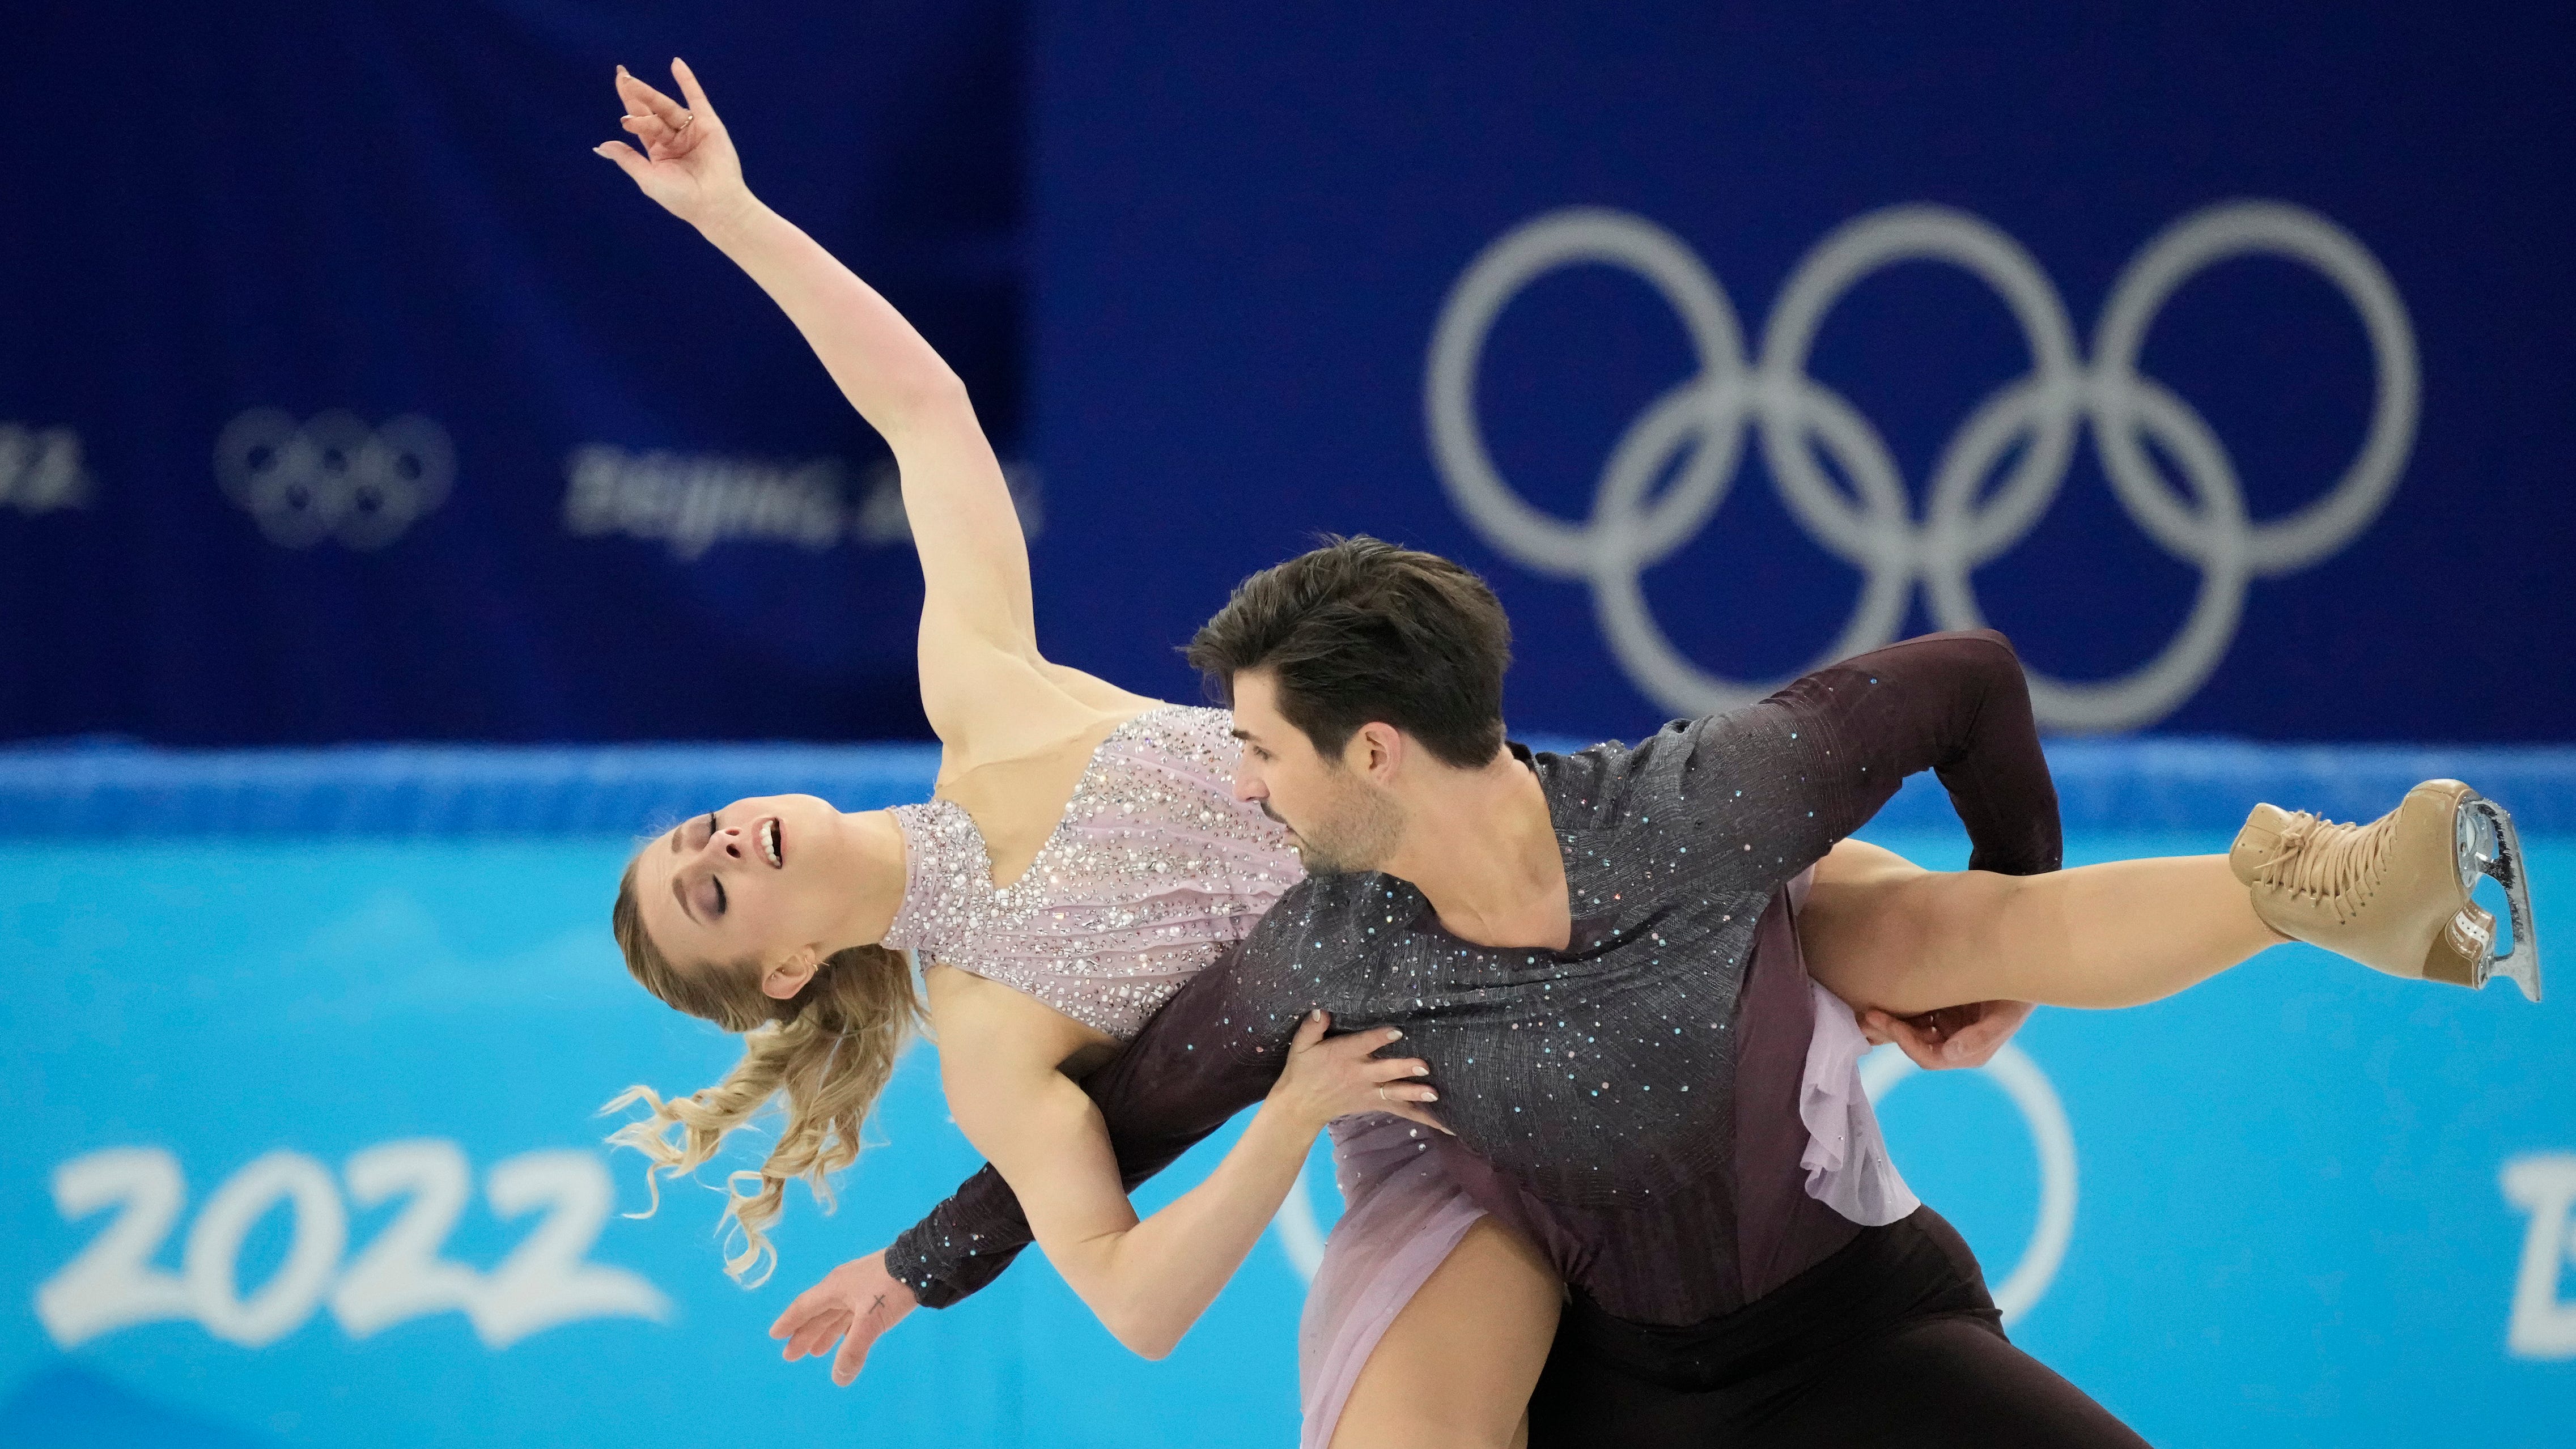 Madison Hubbell and Zachary Donohue took bronze in ice dancing at the 2022 Beijing Olympics.